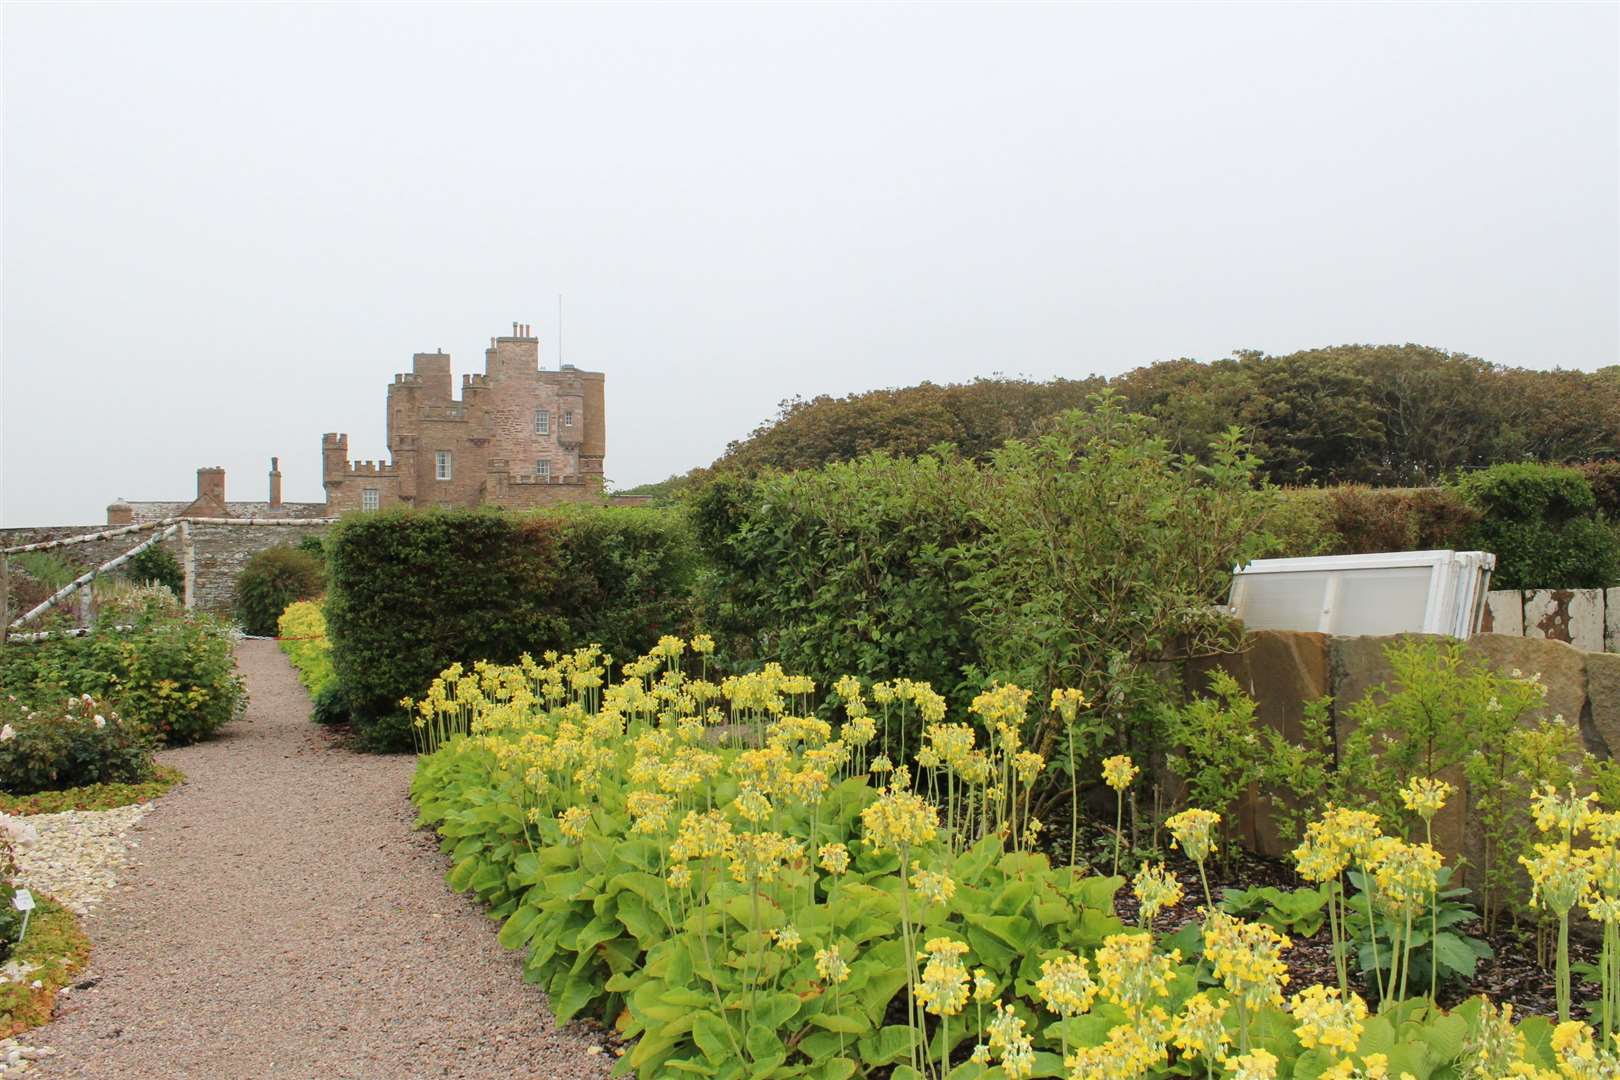 The castle can be seen in the background of this garden photo.